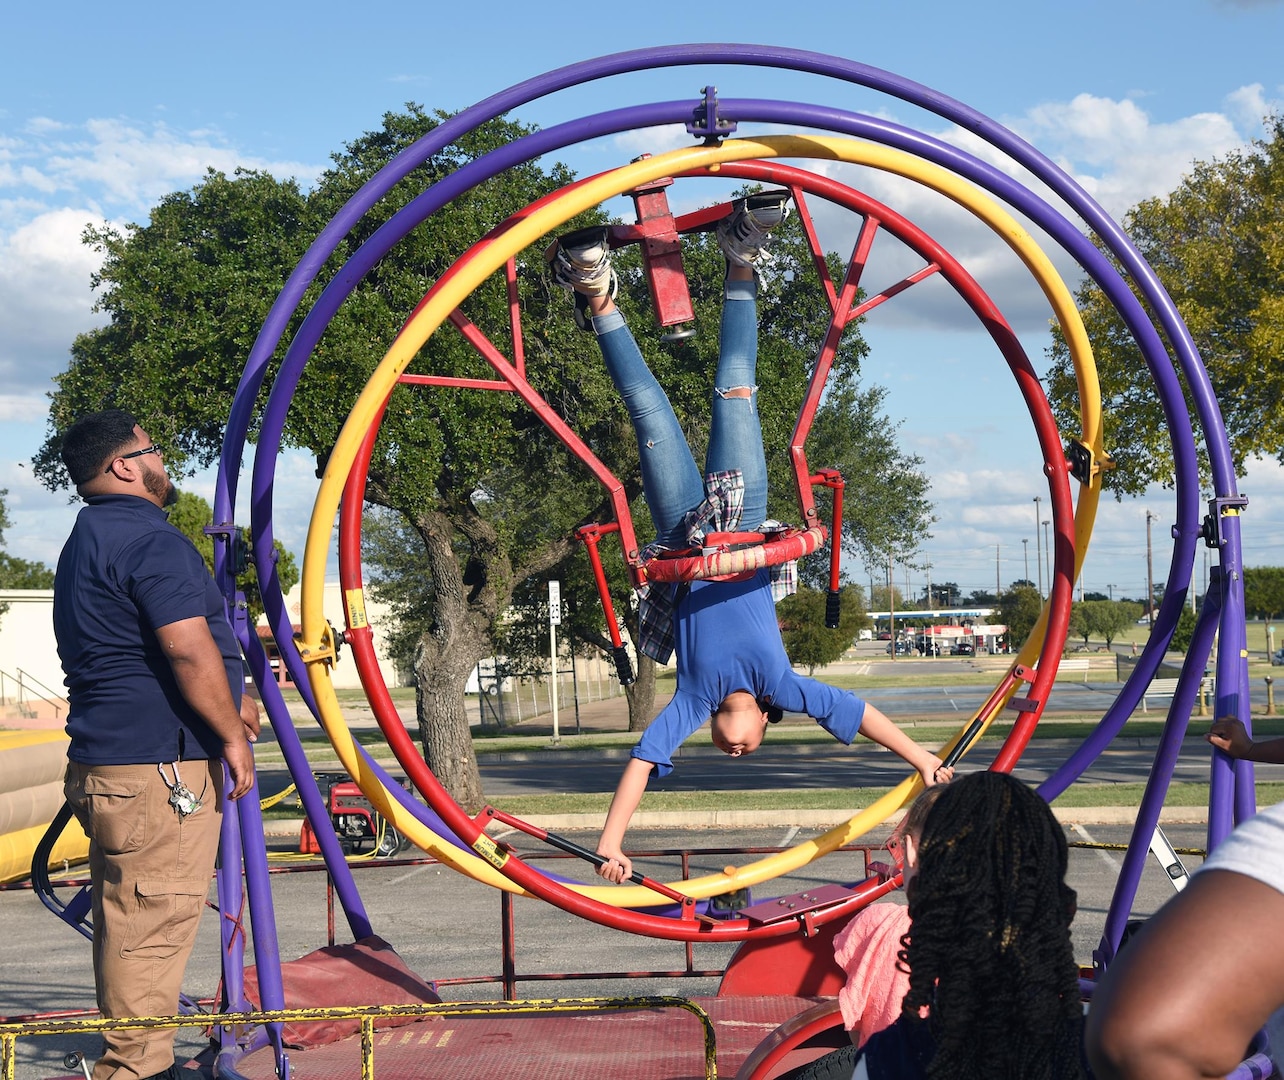 Even the kids were able to get in on the fun as this youngster goes upside down on an attraction at the annual Joint Base San Antonio-Fort Sam Houston Oktoberfest Oct. 21.